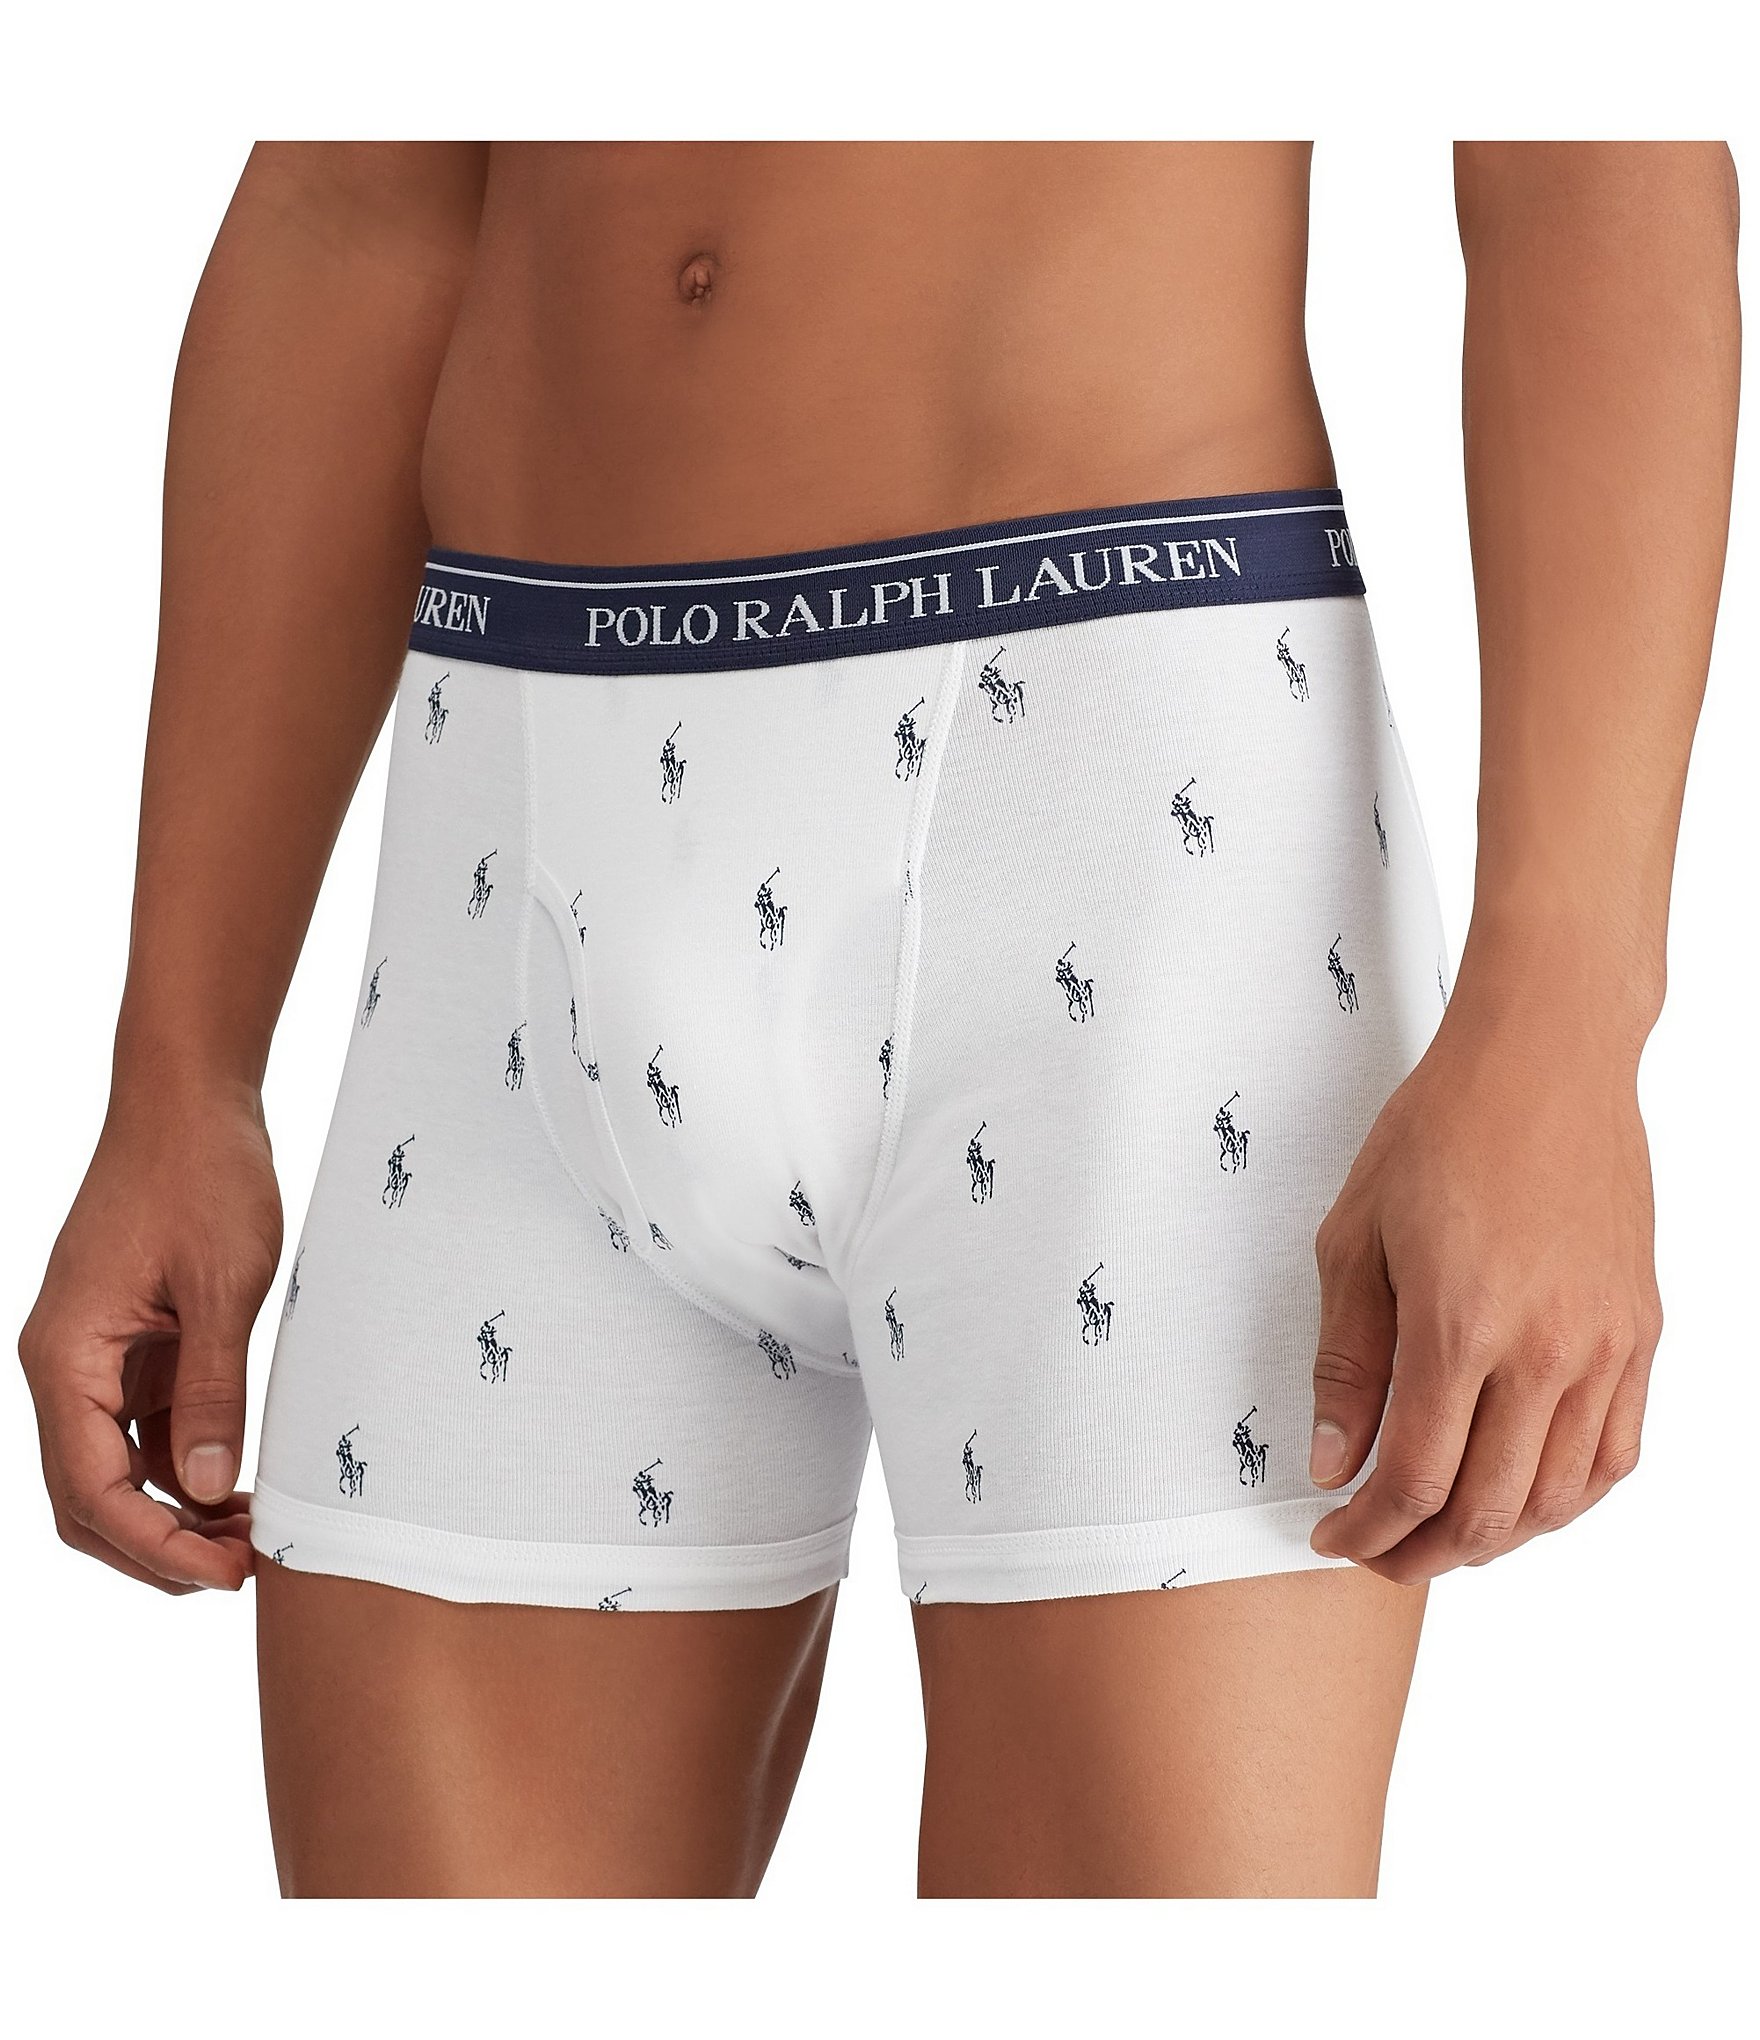 Polo Ralph Lauren Classic Fit Assorted 6 Inseam Boxer Briefs 3-Pack